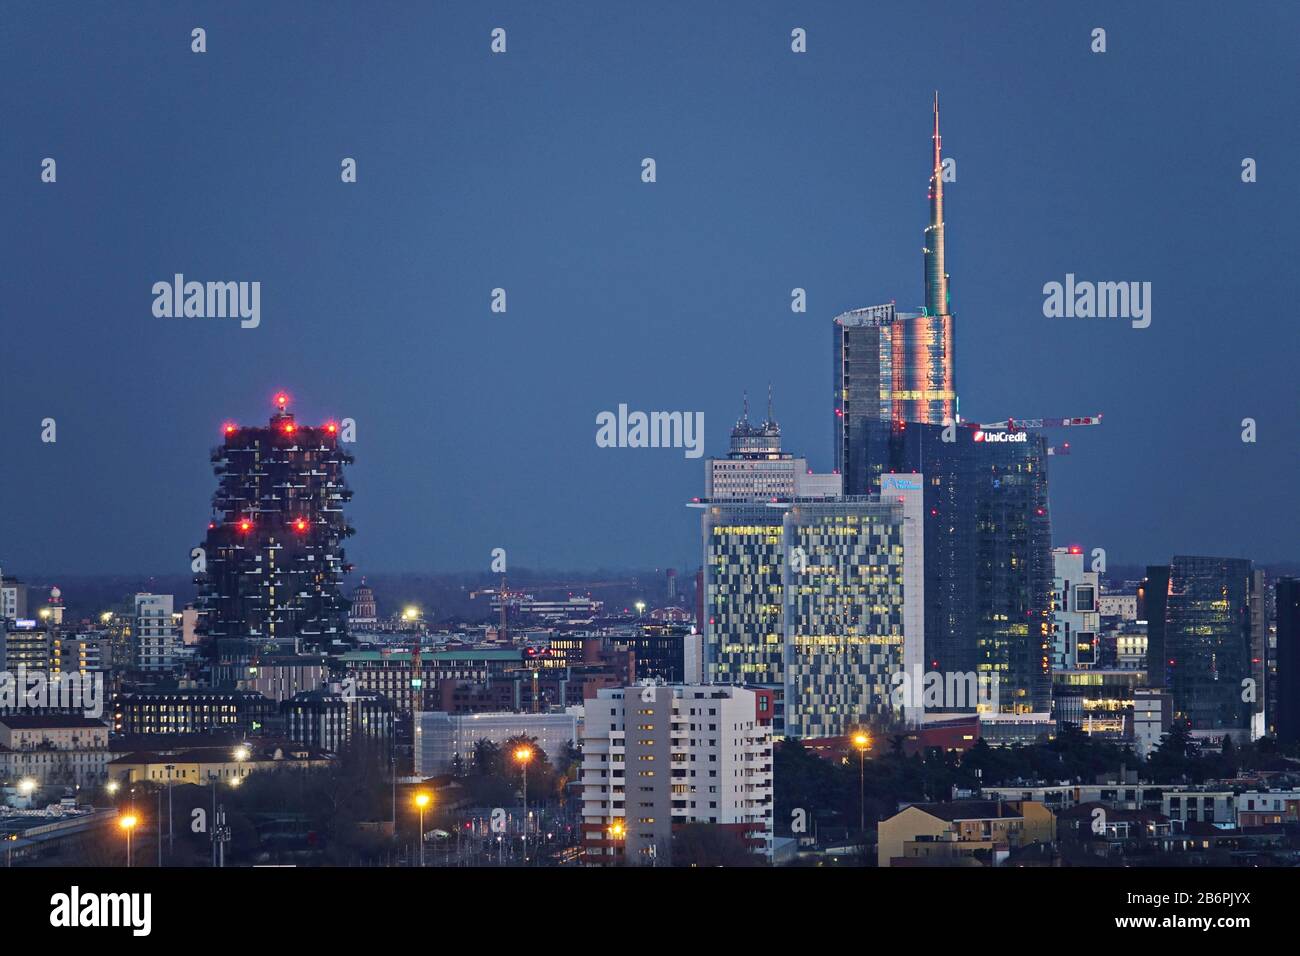 Skyline at nightfall with new skyscrapers. Milan, Italy - March 2020 Stock Photo